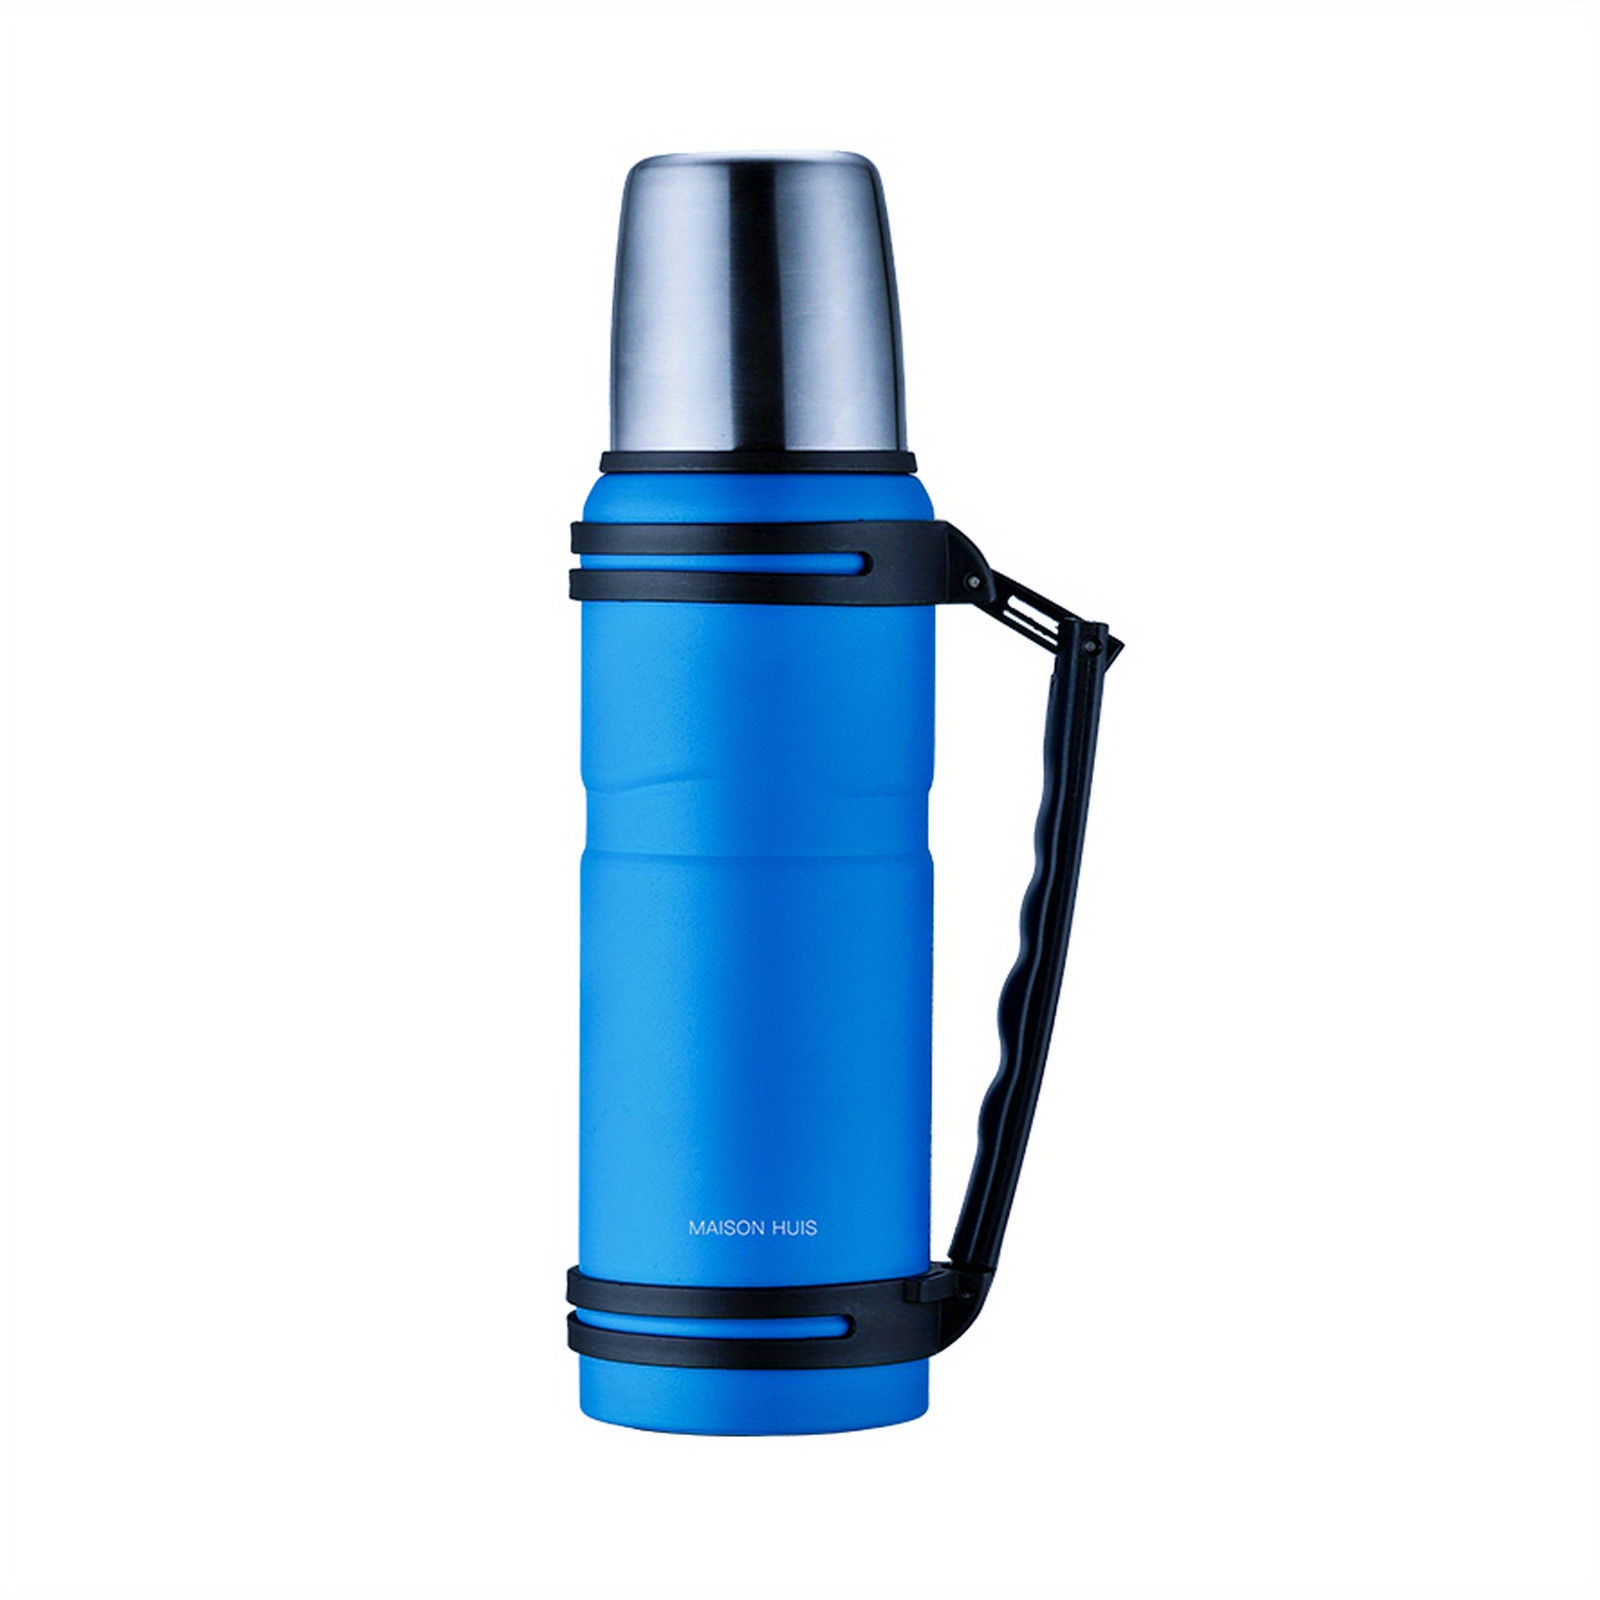 1.2 Litre Water Bottle, Vacuum Insulated Stainless Steel Water